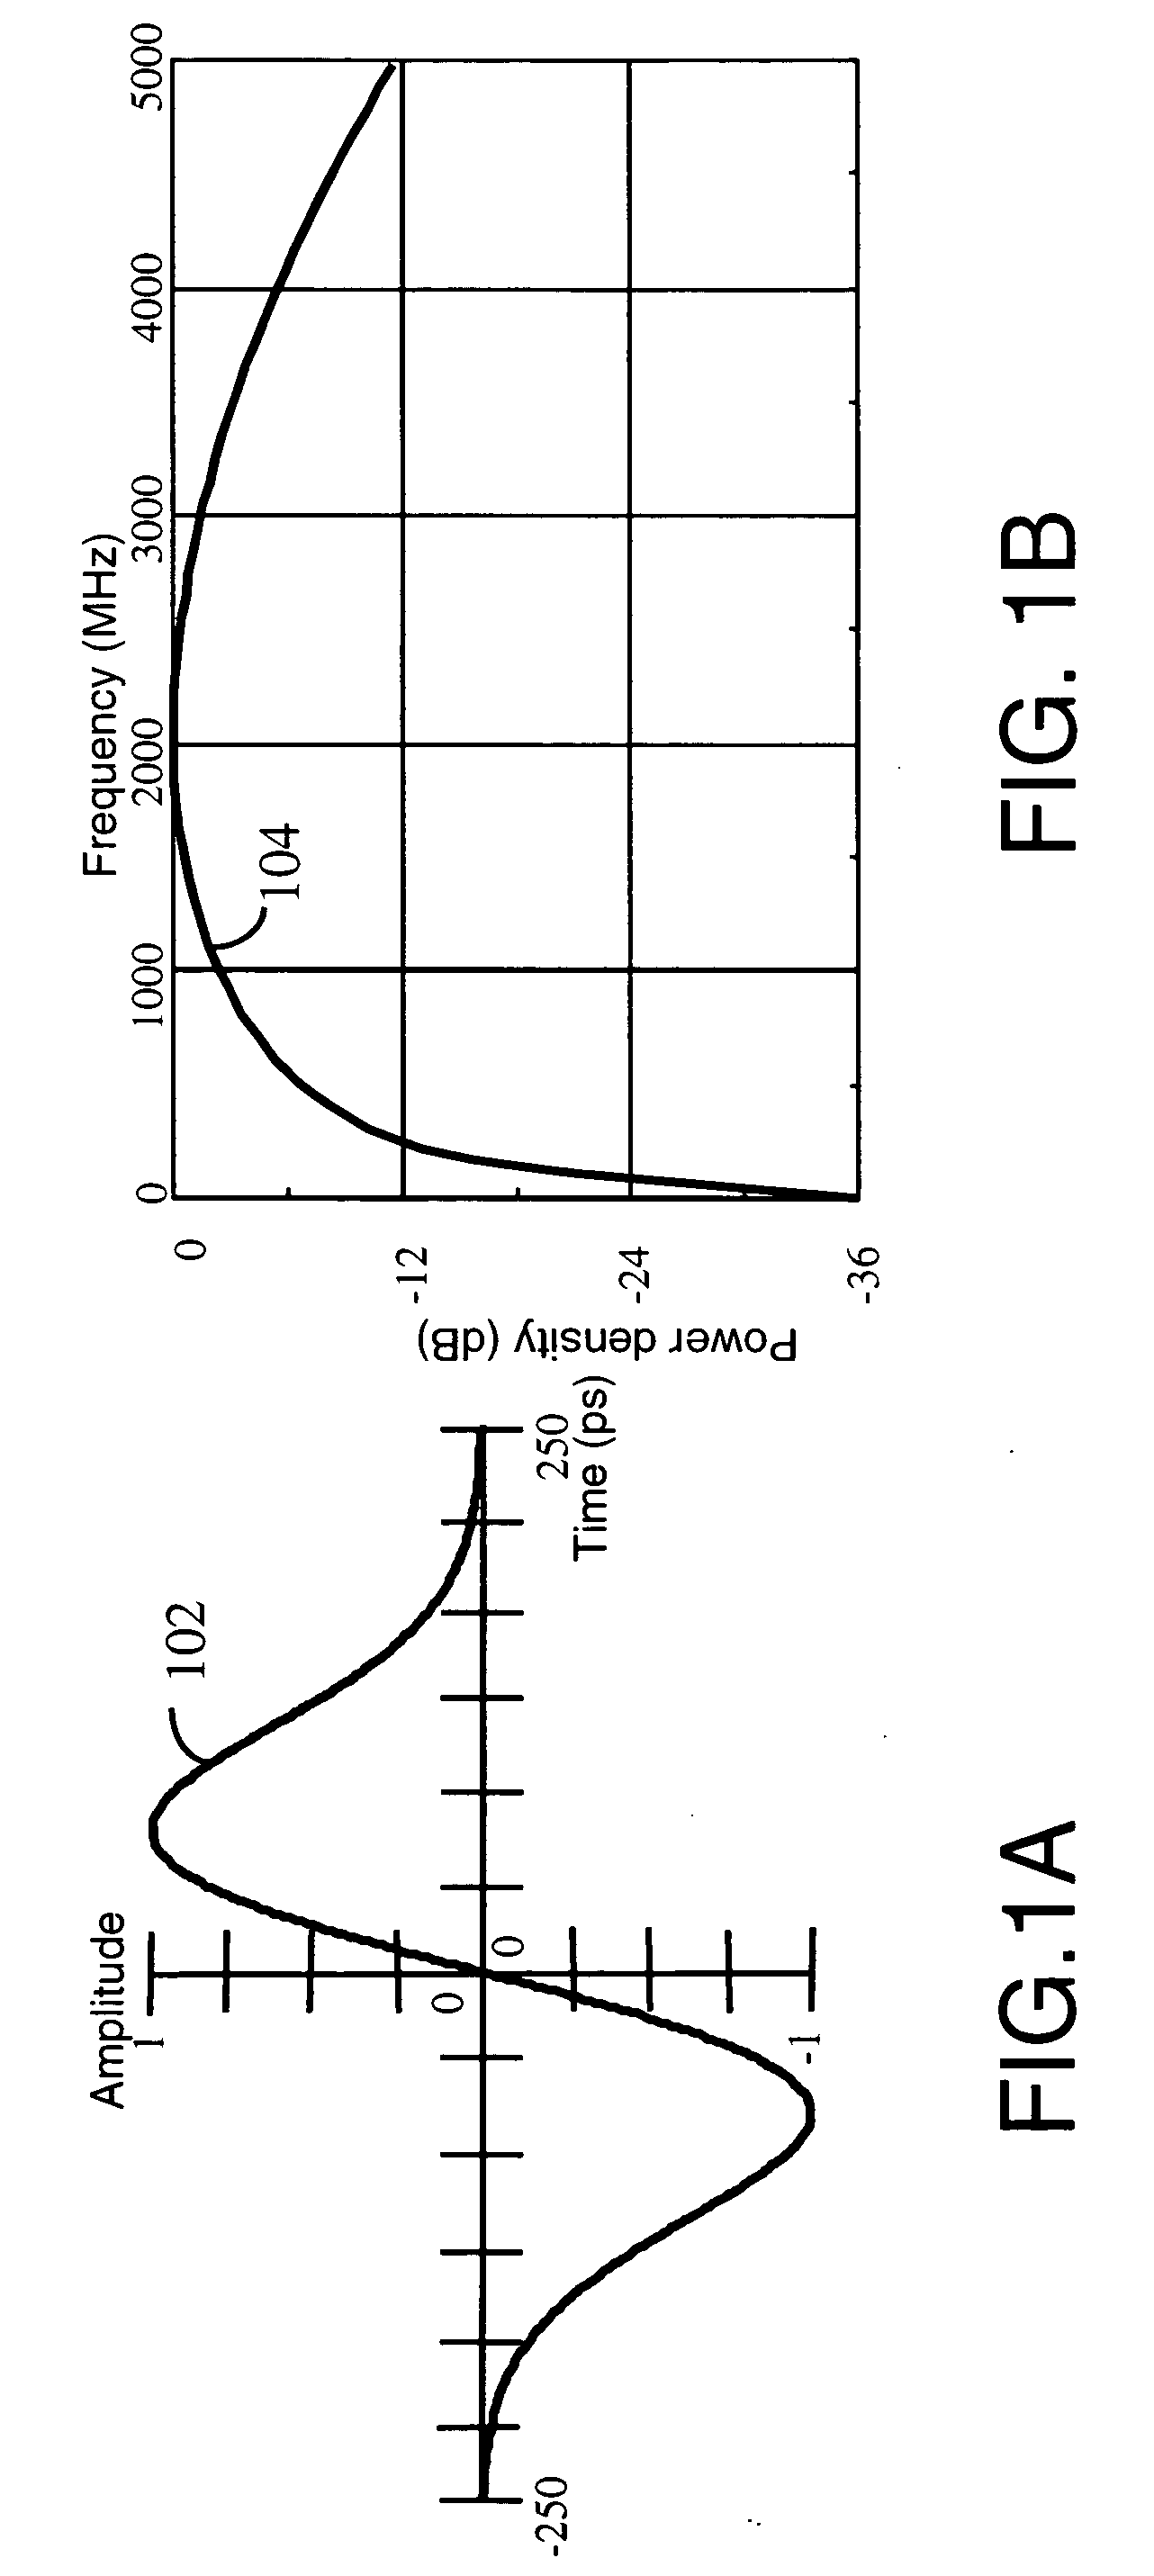 System and method for detecting objects and communicating information